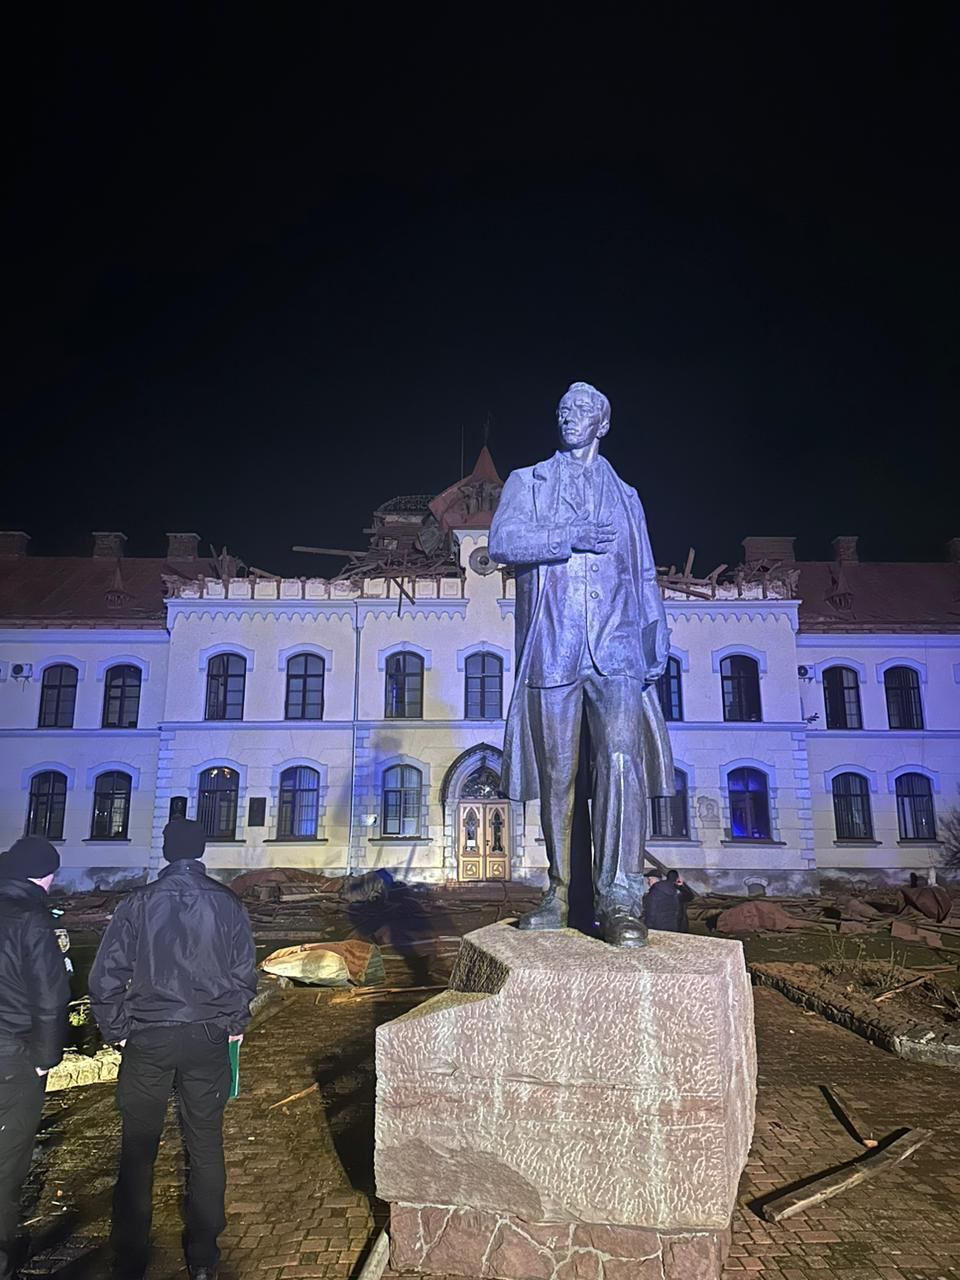 Attacked by drones: the occupiers destroyed the Shukhevych Museum in Lviv and damaged the university in Dublin where Bandera studied. 